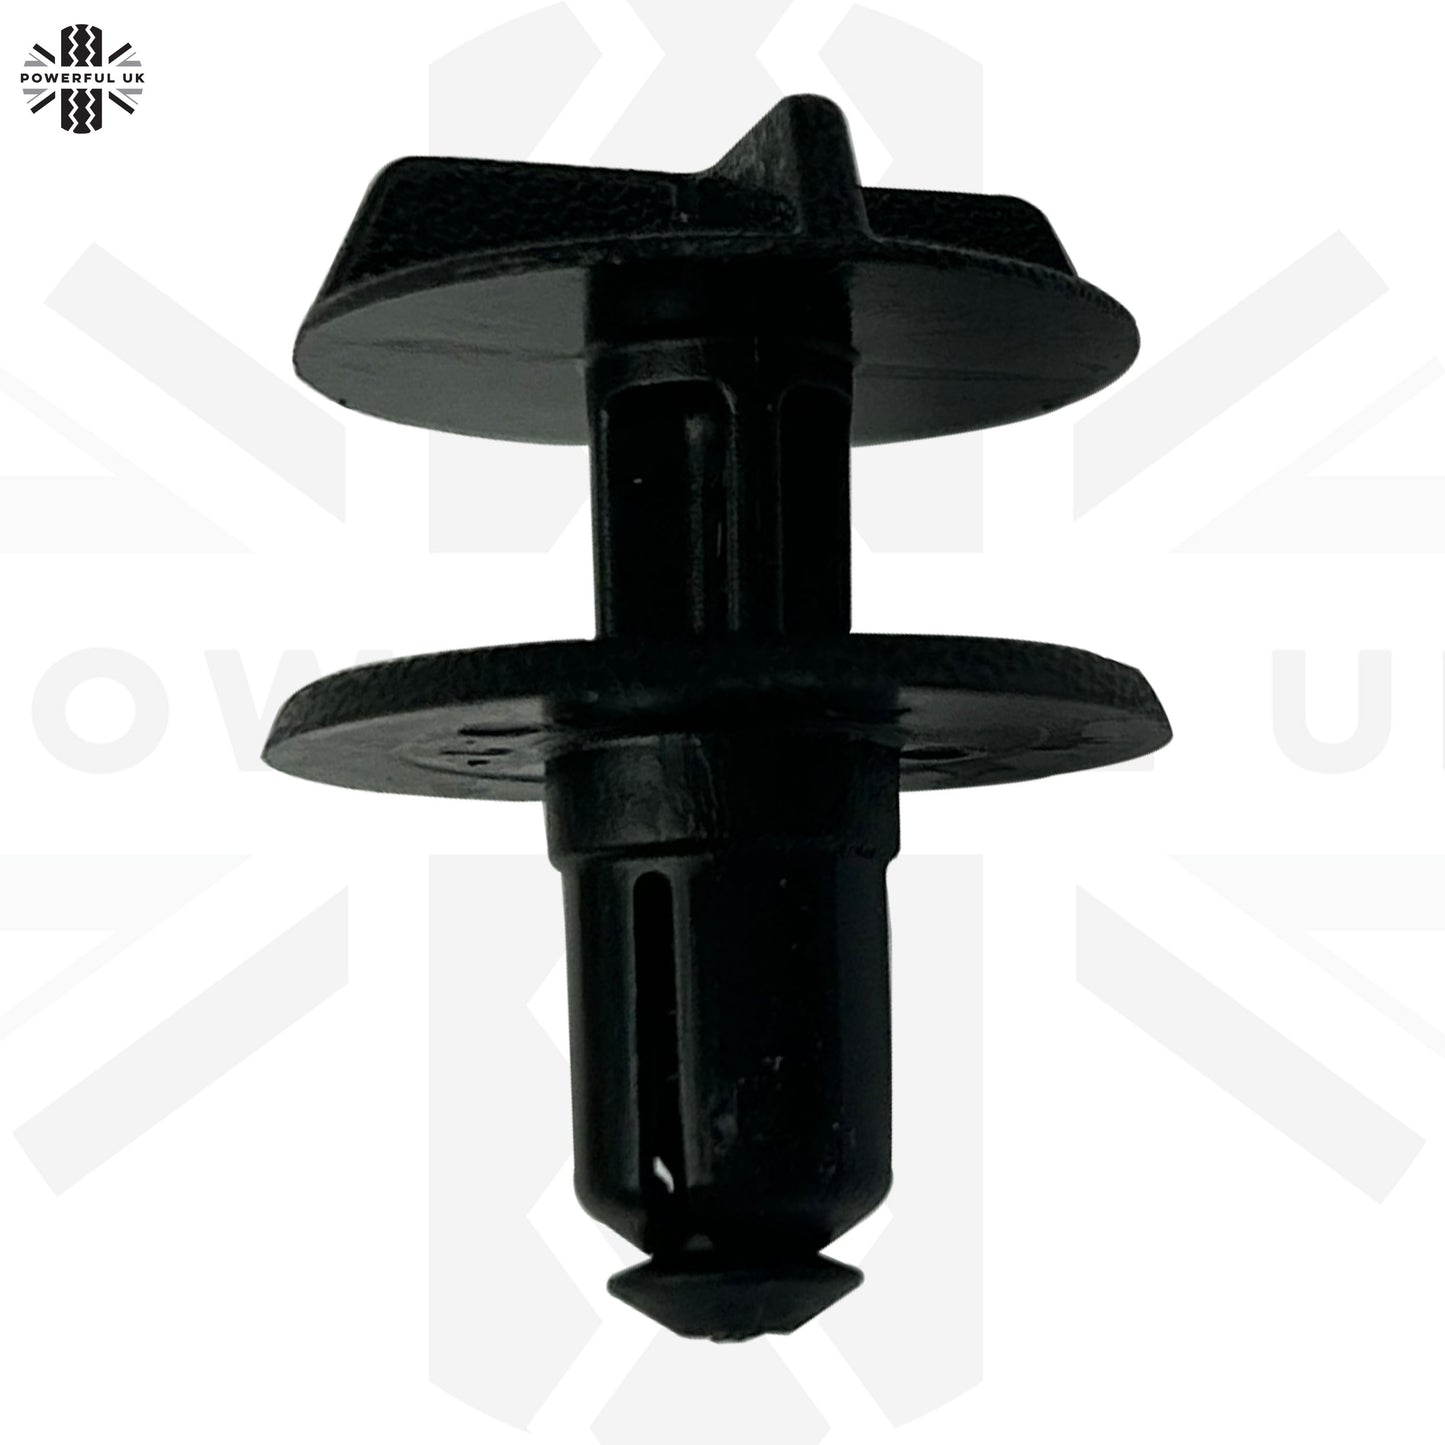 Genuine 5pc Clips for the Battery Cover on the Land Rover Discovery Sport